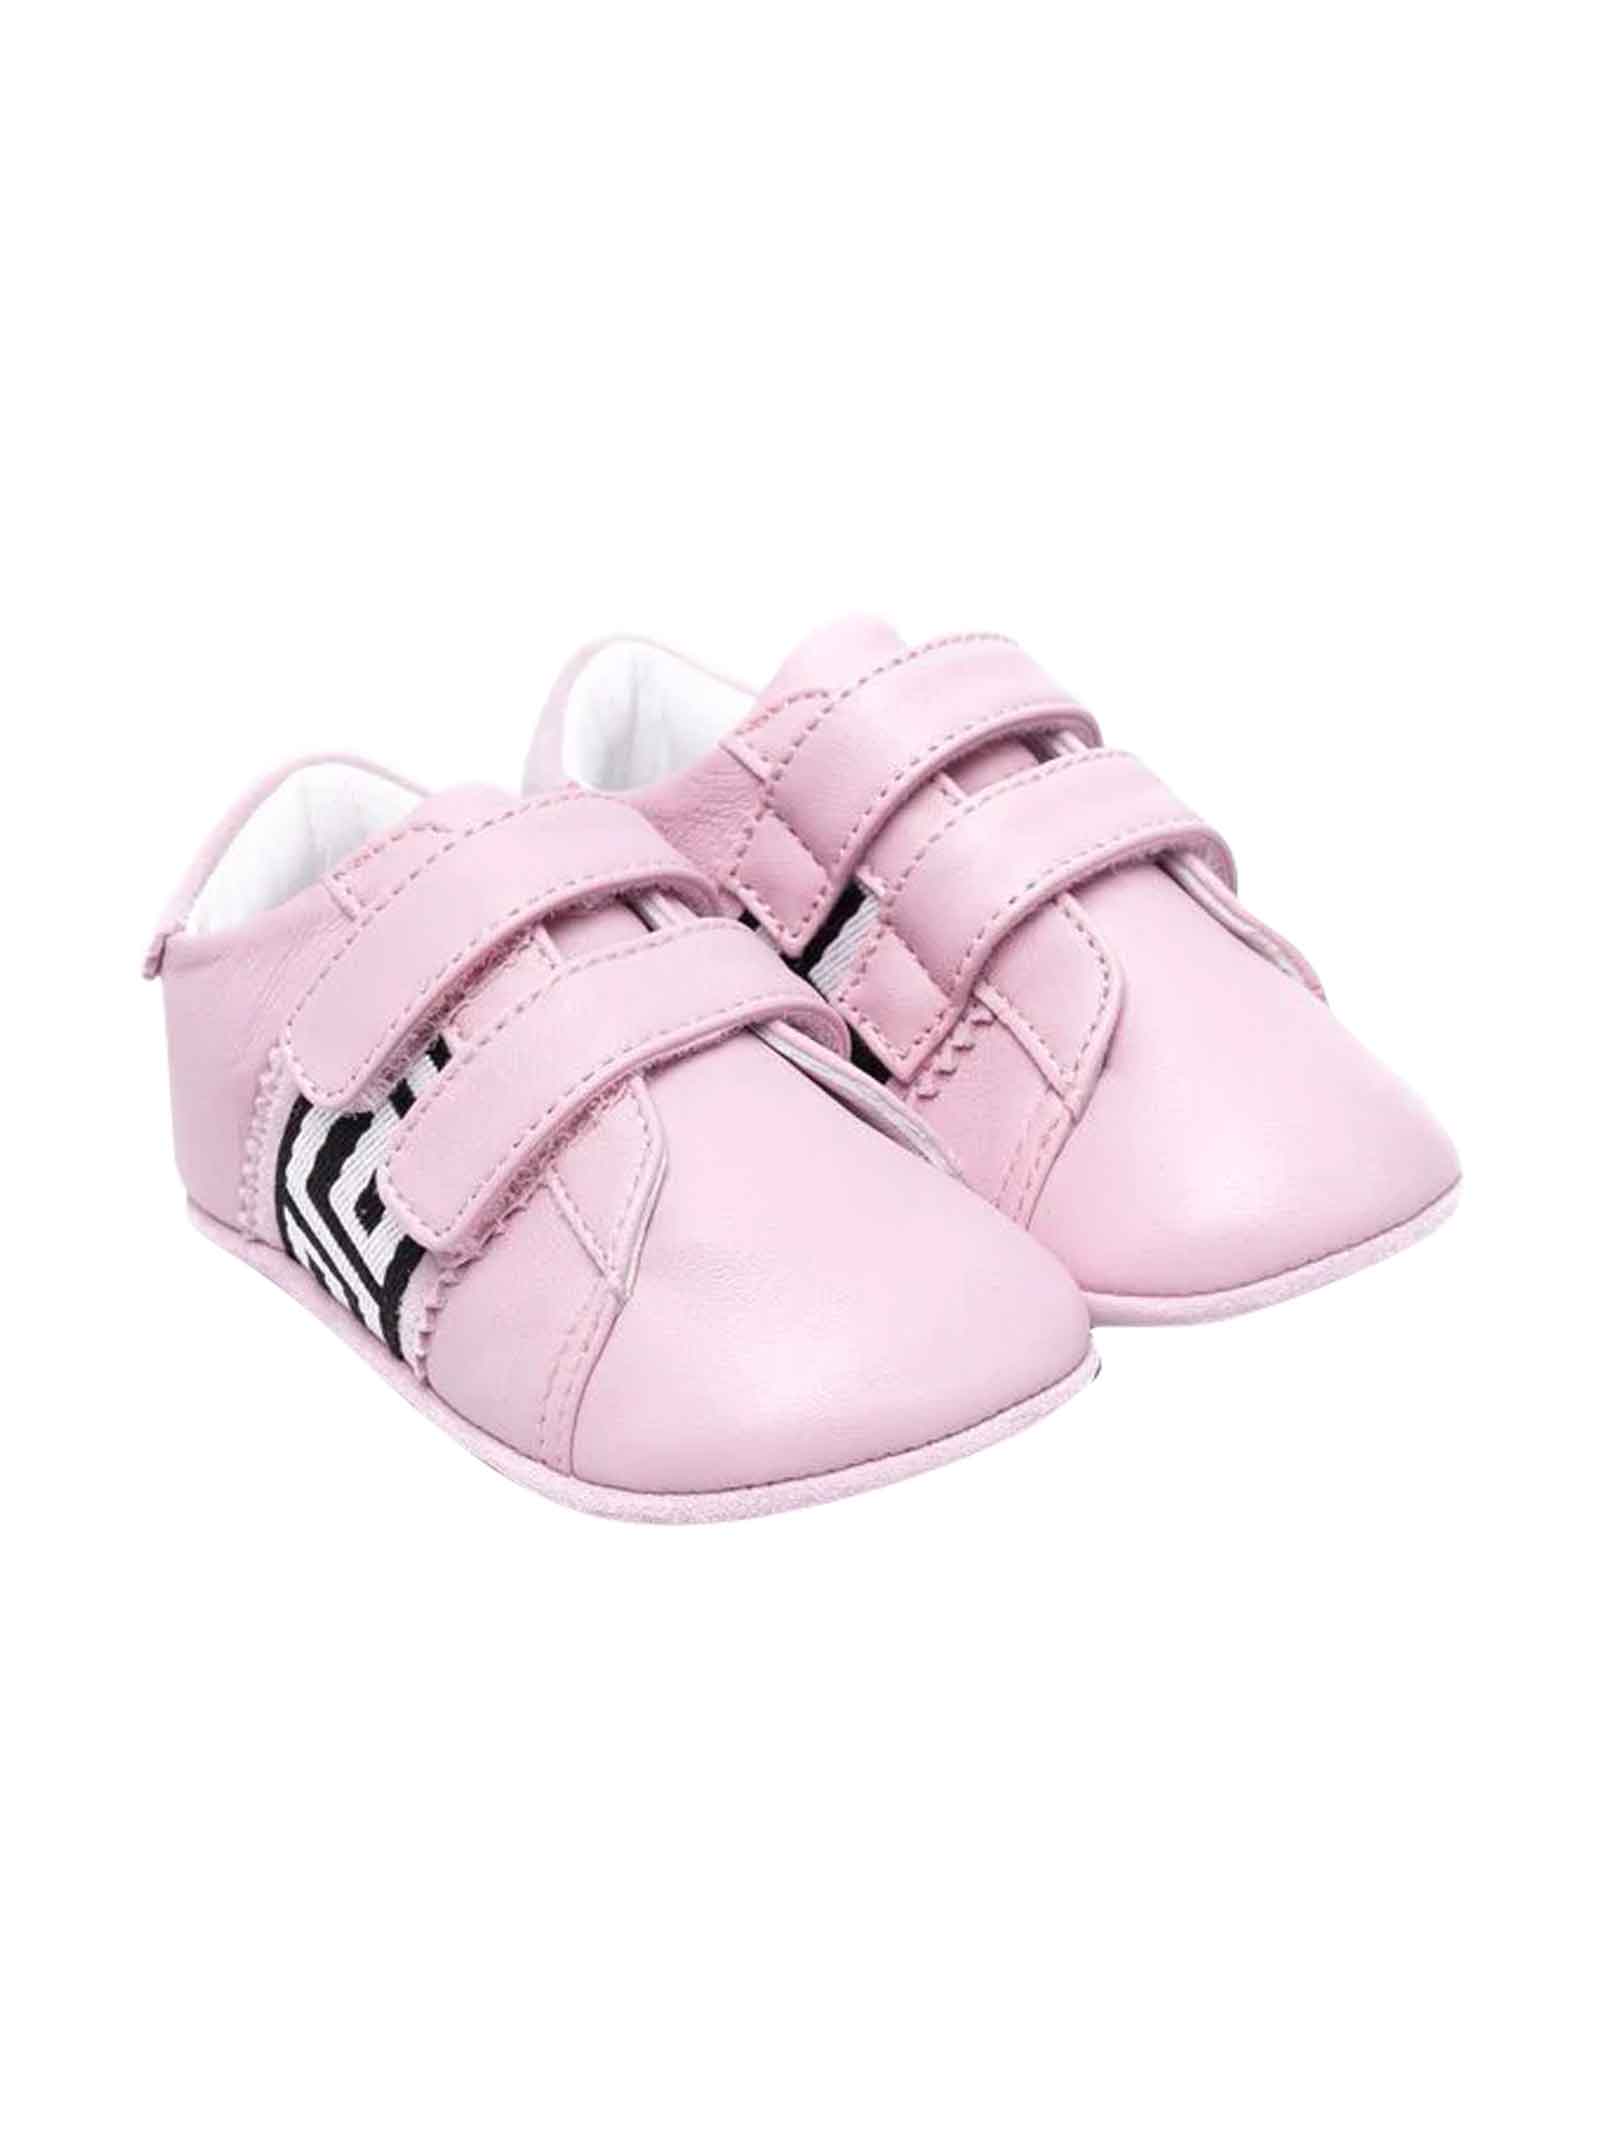 Versace Young Newborn Pink Shoes